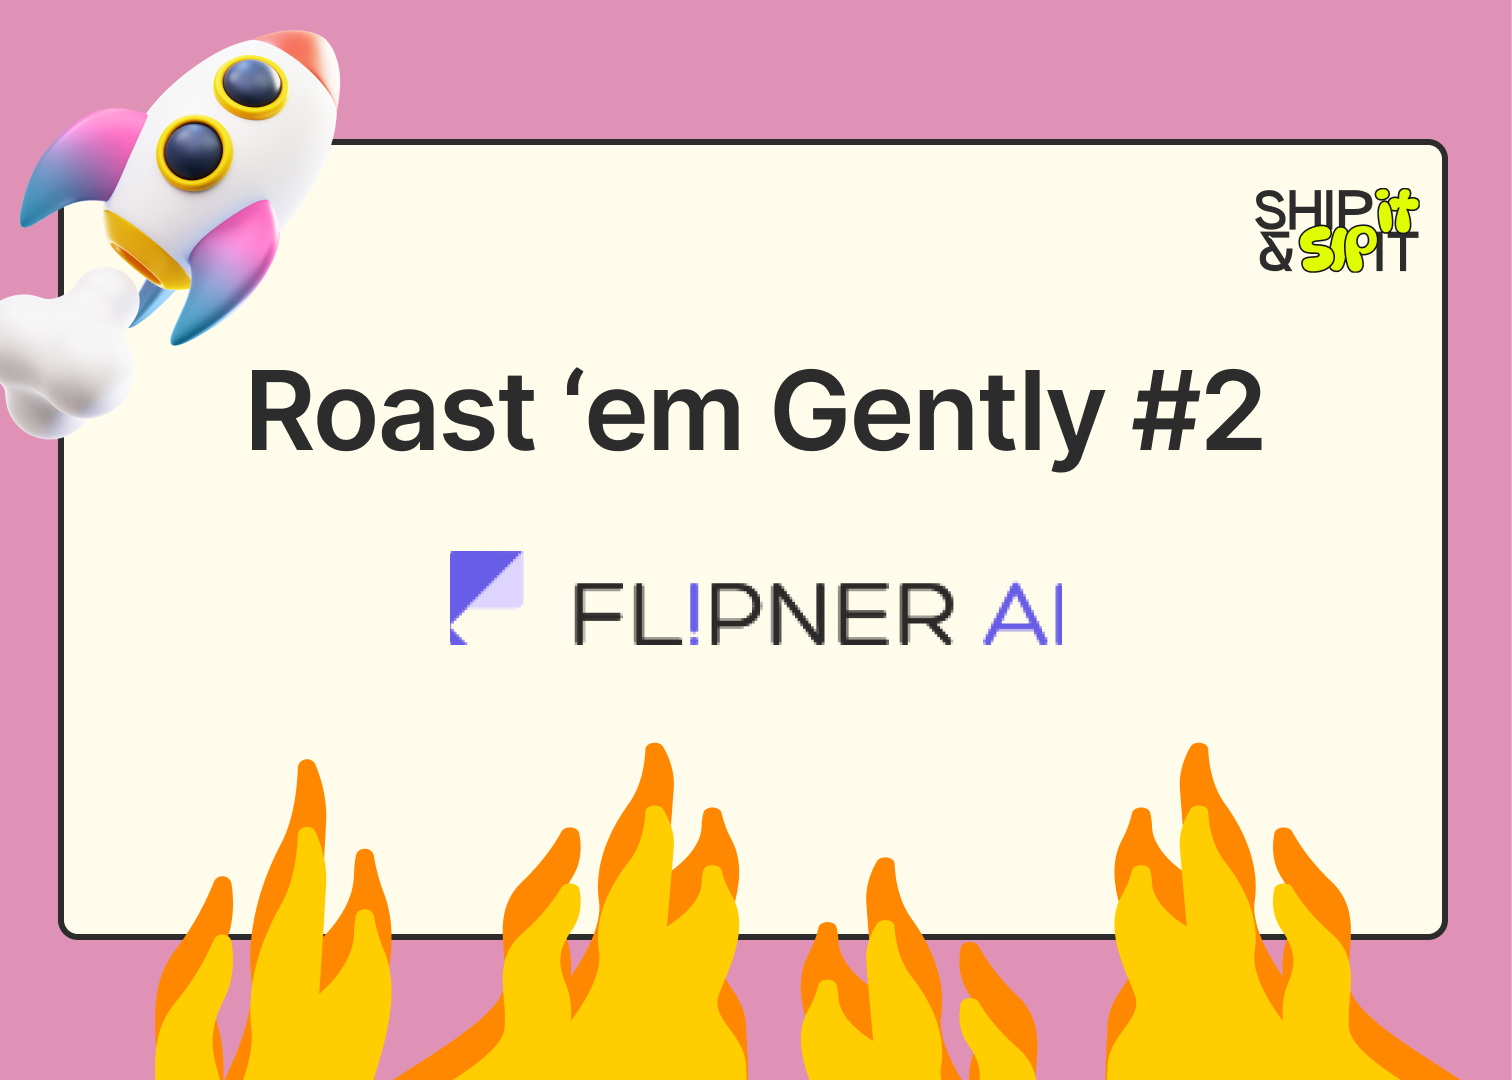 Flipner AI — your new content hub for notes, posts and more? Roast 'em Gently #2